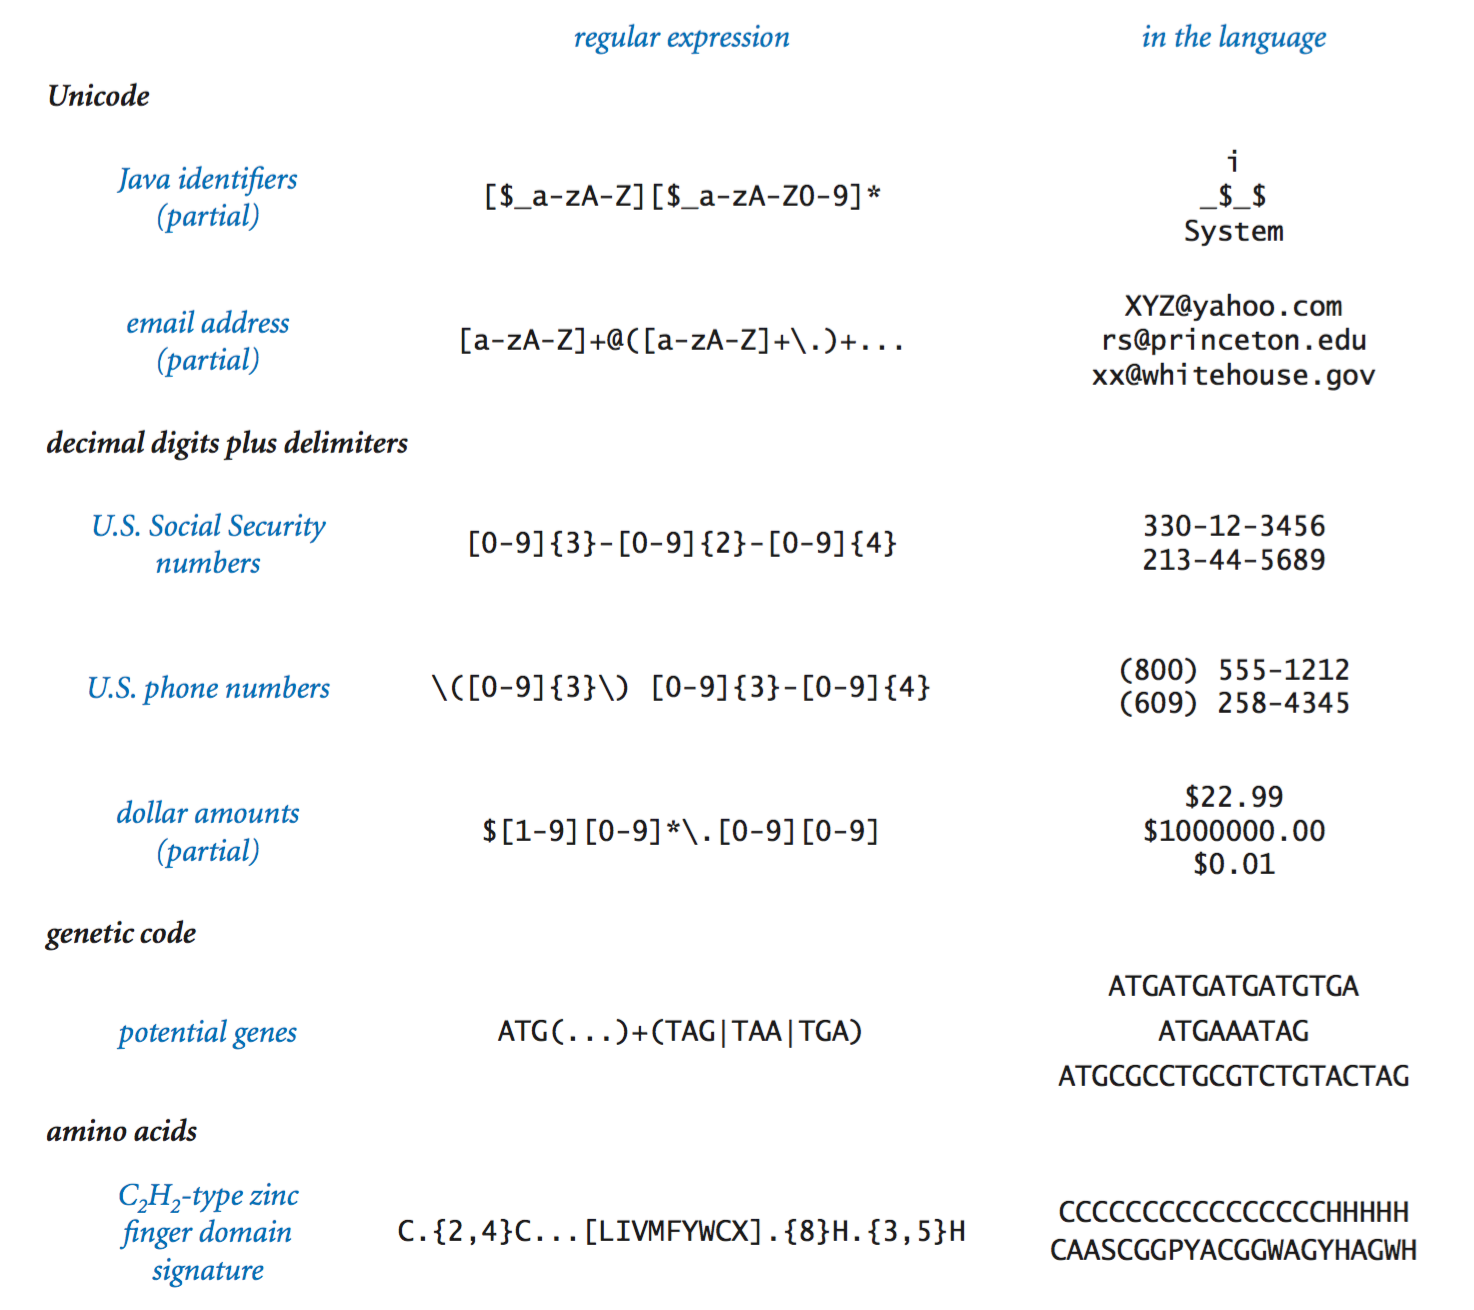 generalized regular expressions